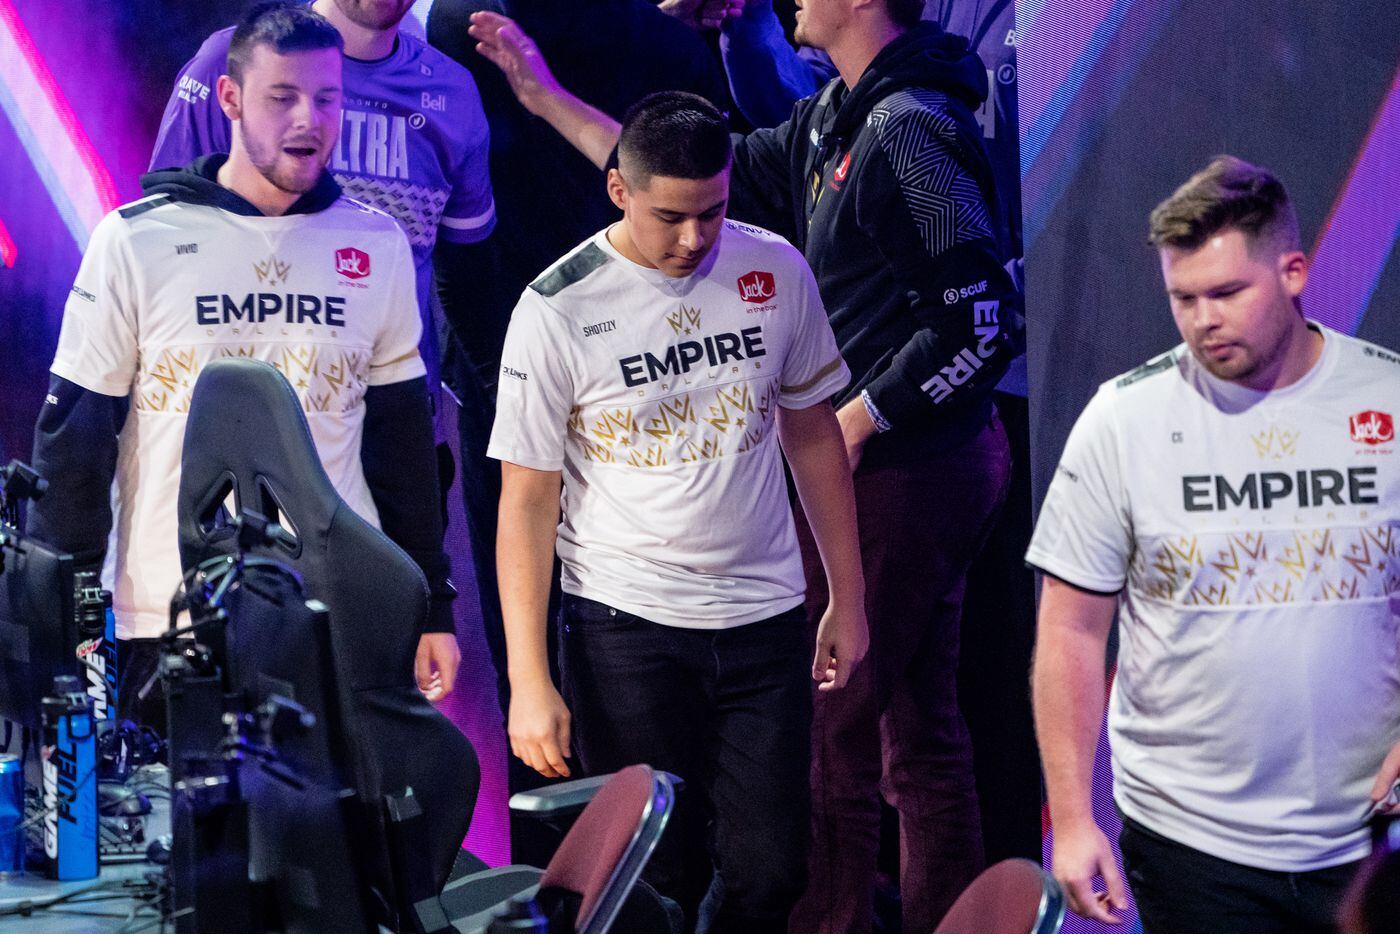 From left, Reece “Vivid” Drost, Anthony “Shotzzy” Cuevas-Castro, and Ian “C6” Porter react to the Dallas Empires elimination from the  Call of Duty league playoffs at the Galen Center on Saturday, August 21, 2021 in Los Angeles, California. The Empire lost to Toronto Ultra 2 - 3, eliminating them from the tournament. (Justin L. Stewart/Special Contributor)